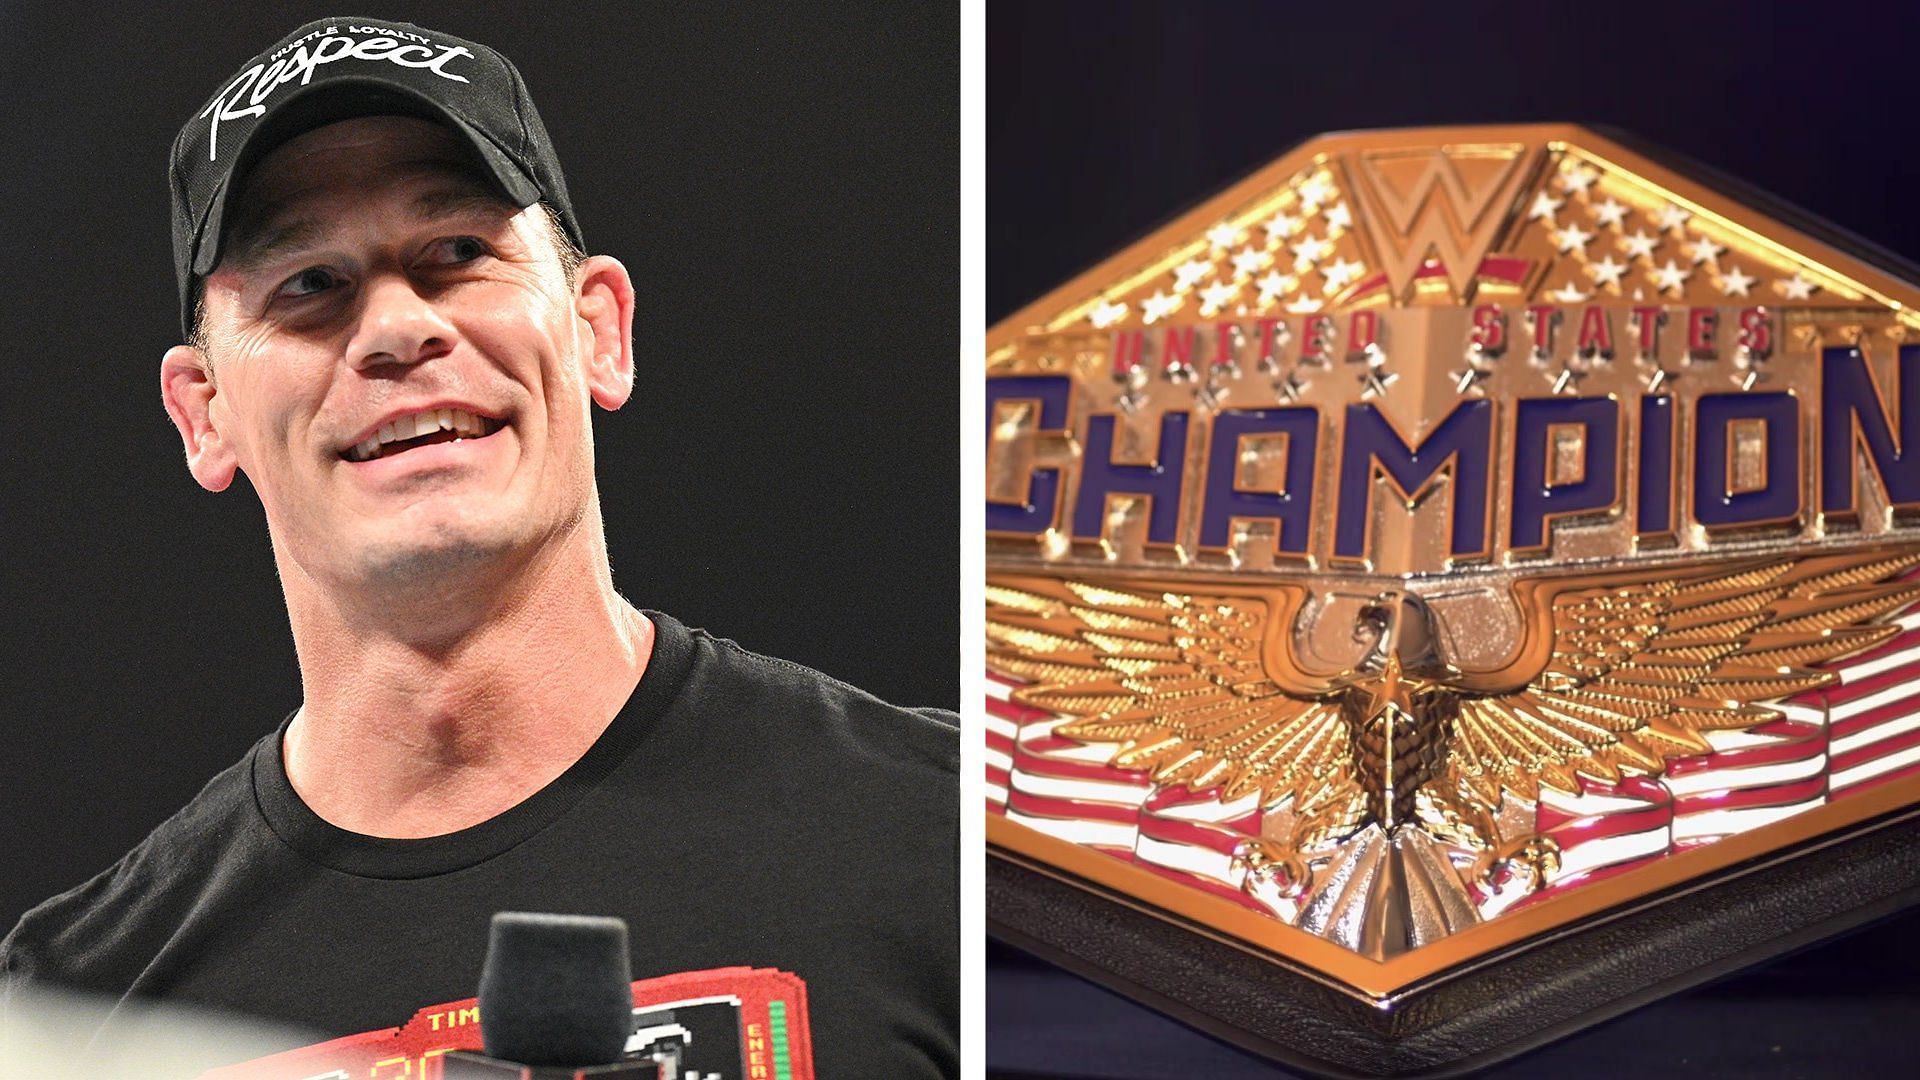 John Cena could become the WWE United States Champion